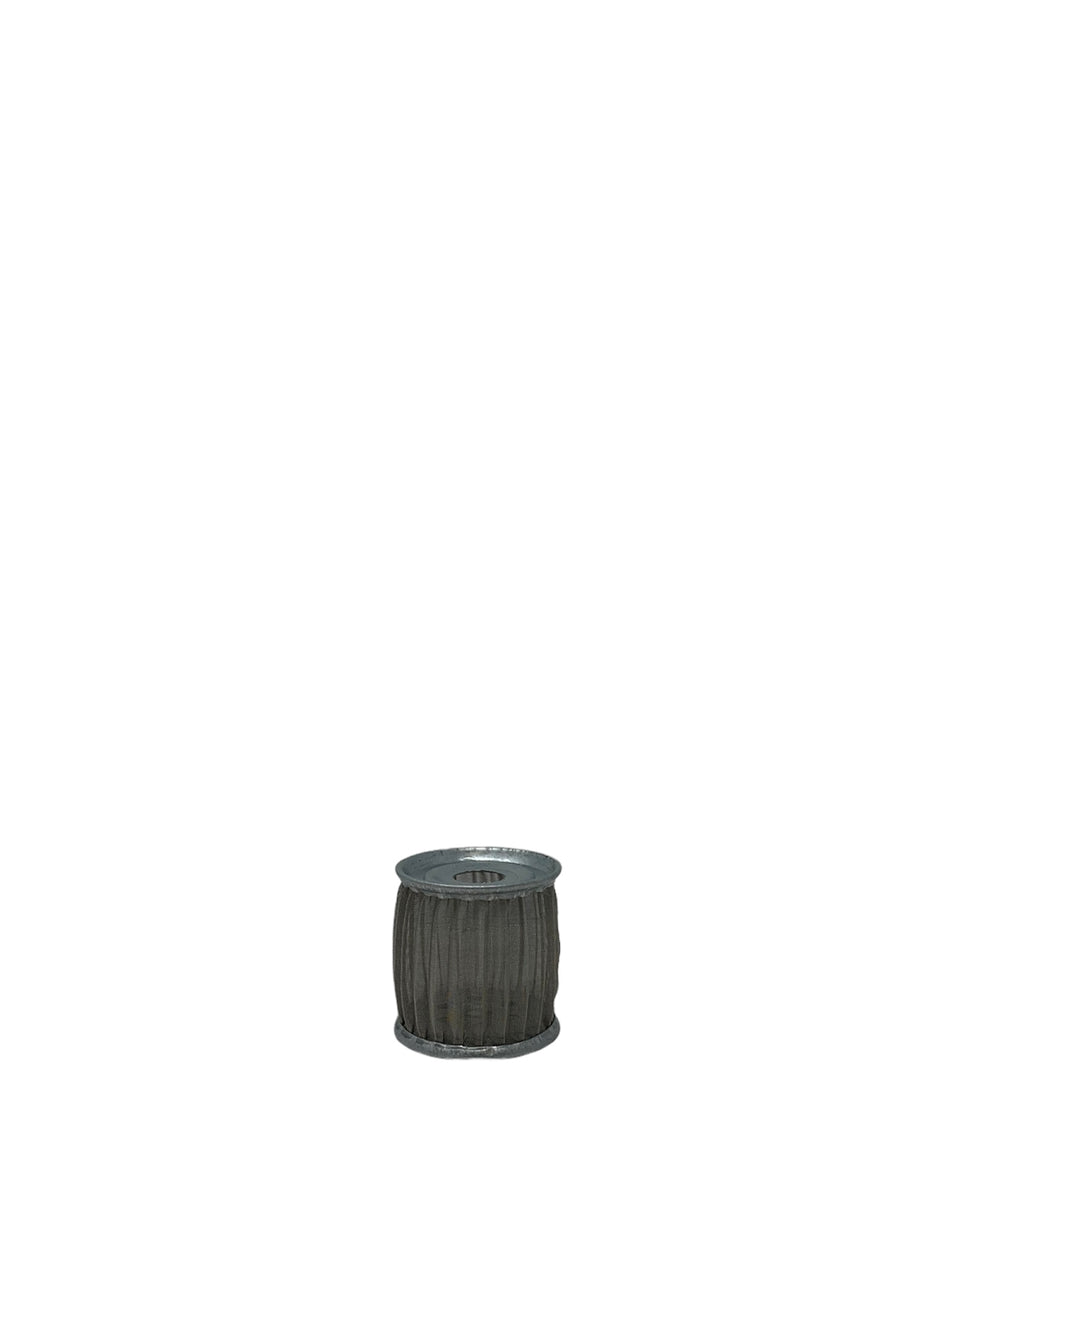 Wire Mesh Filter Element for Fuel Filter